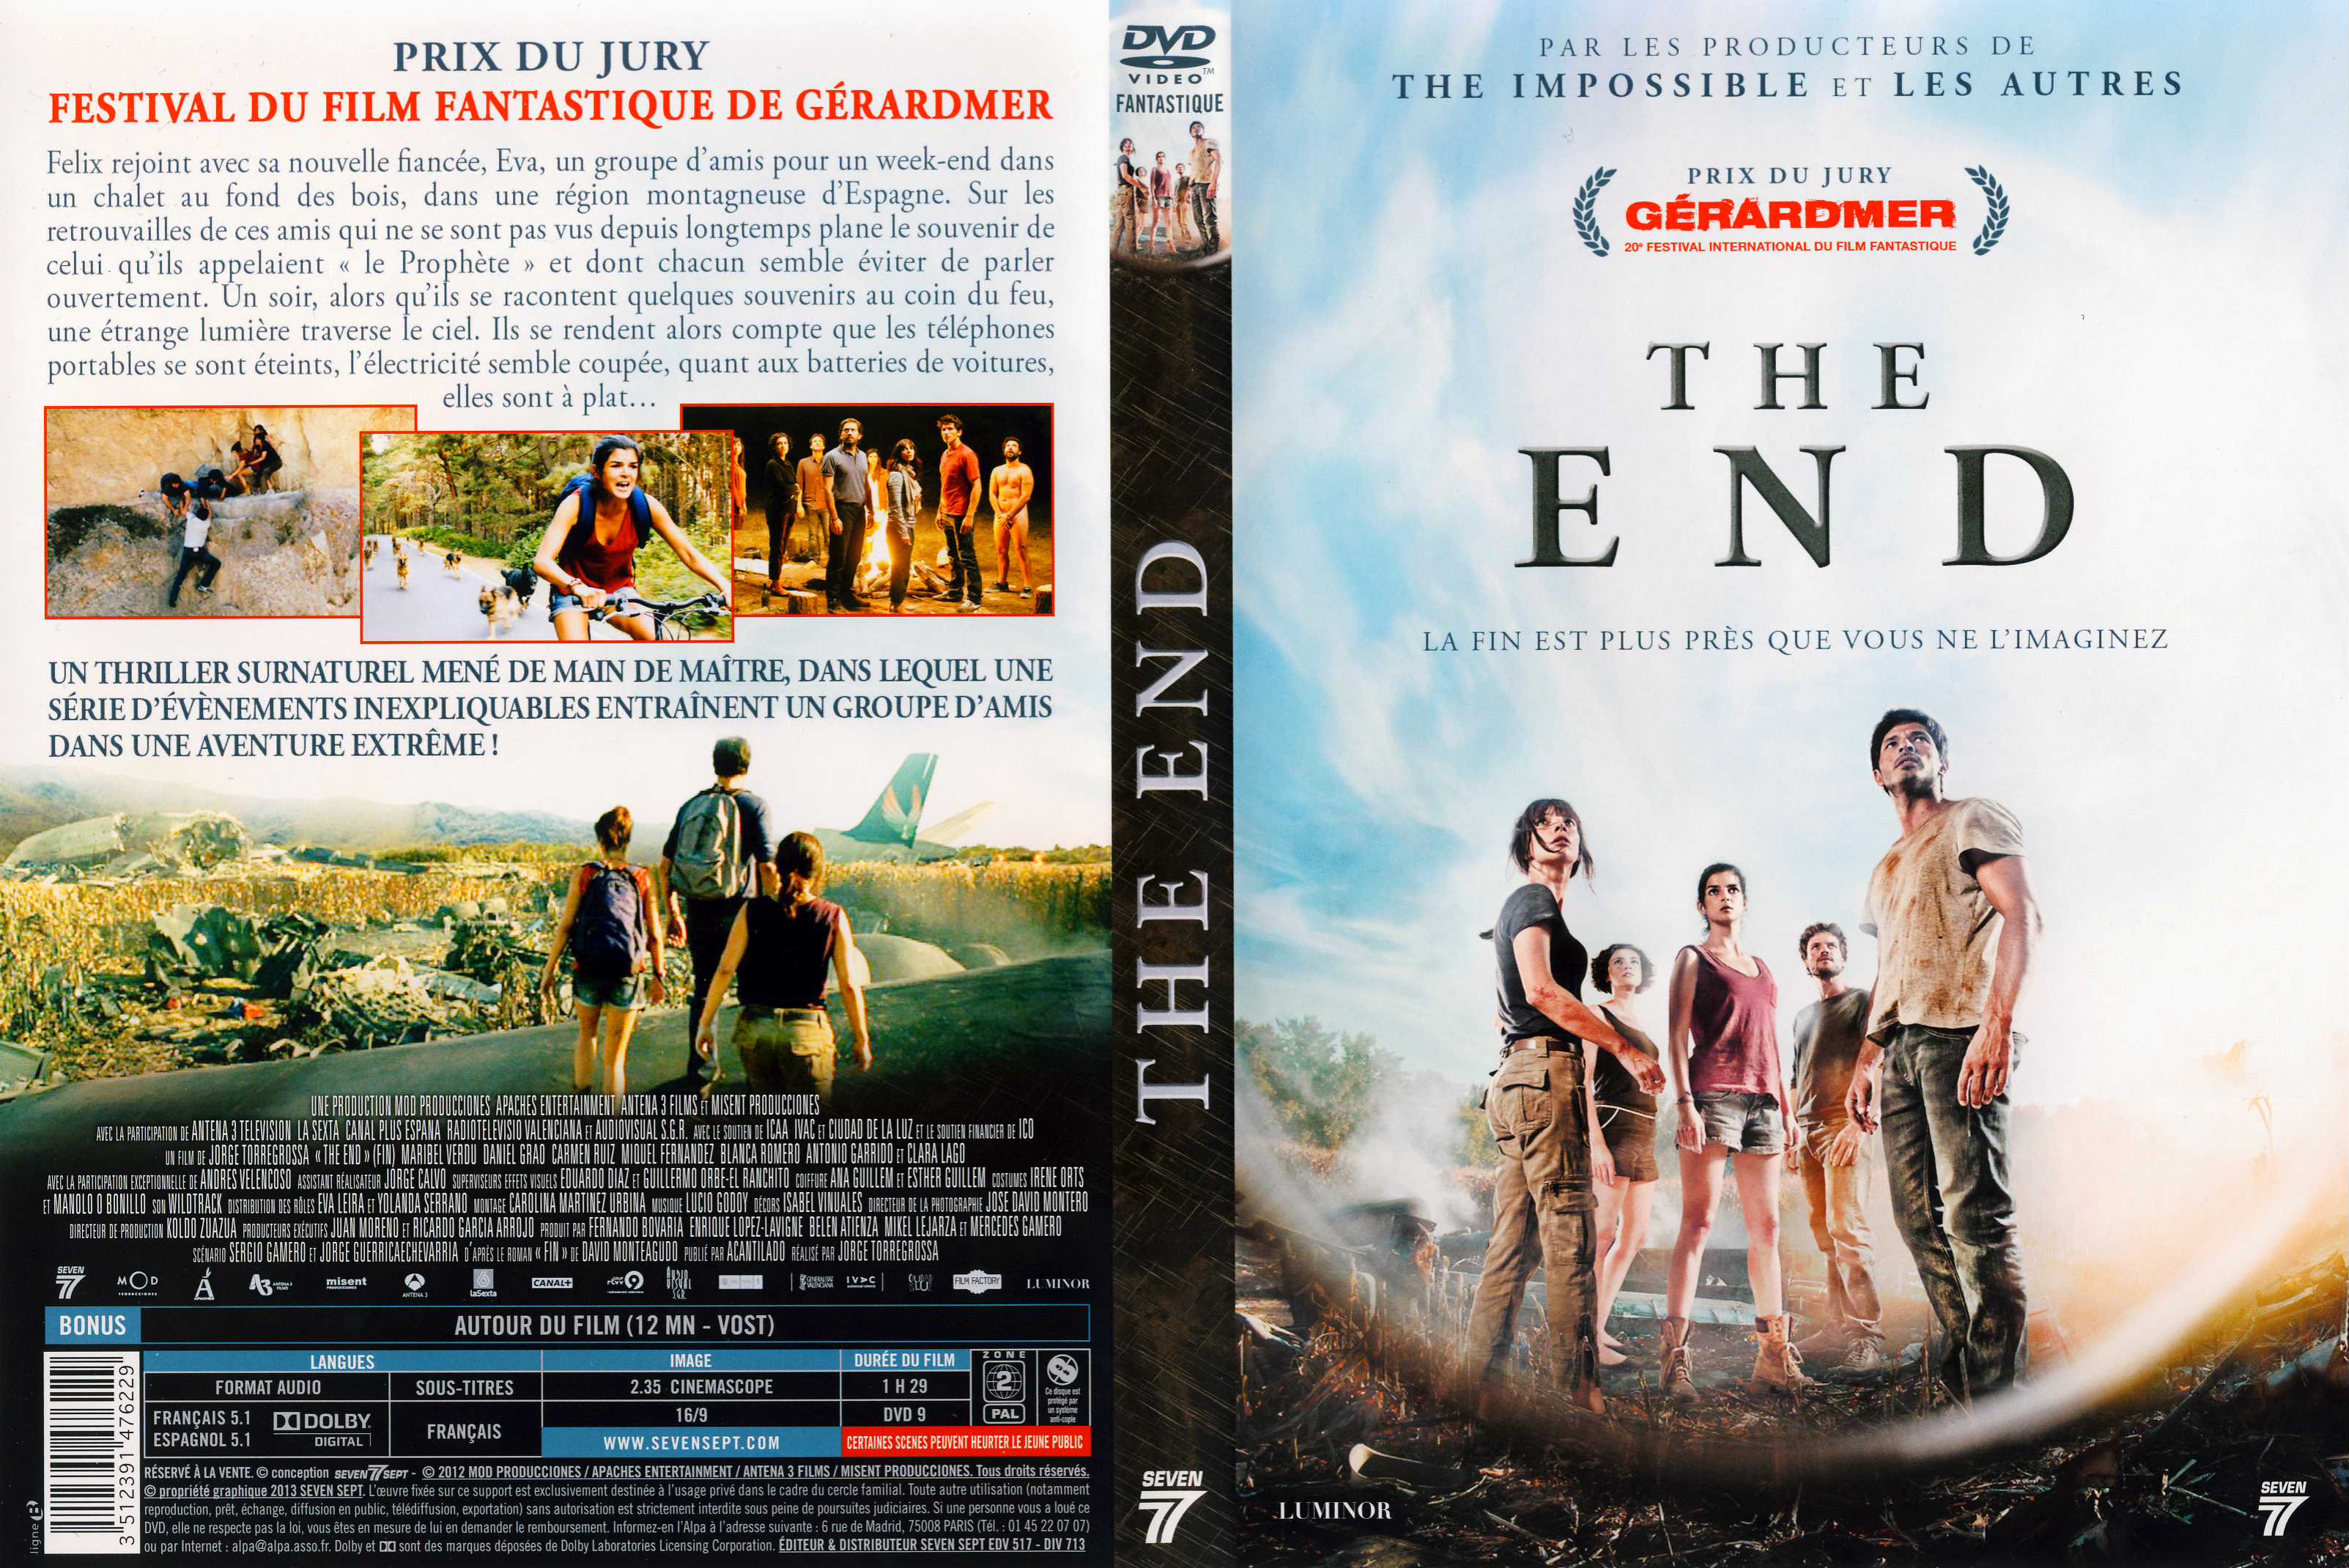 Jaquette DVD The end